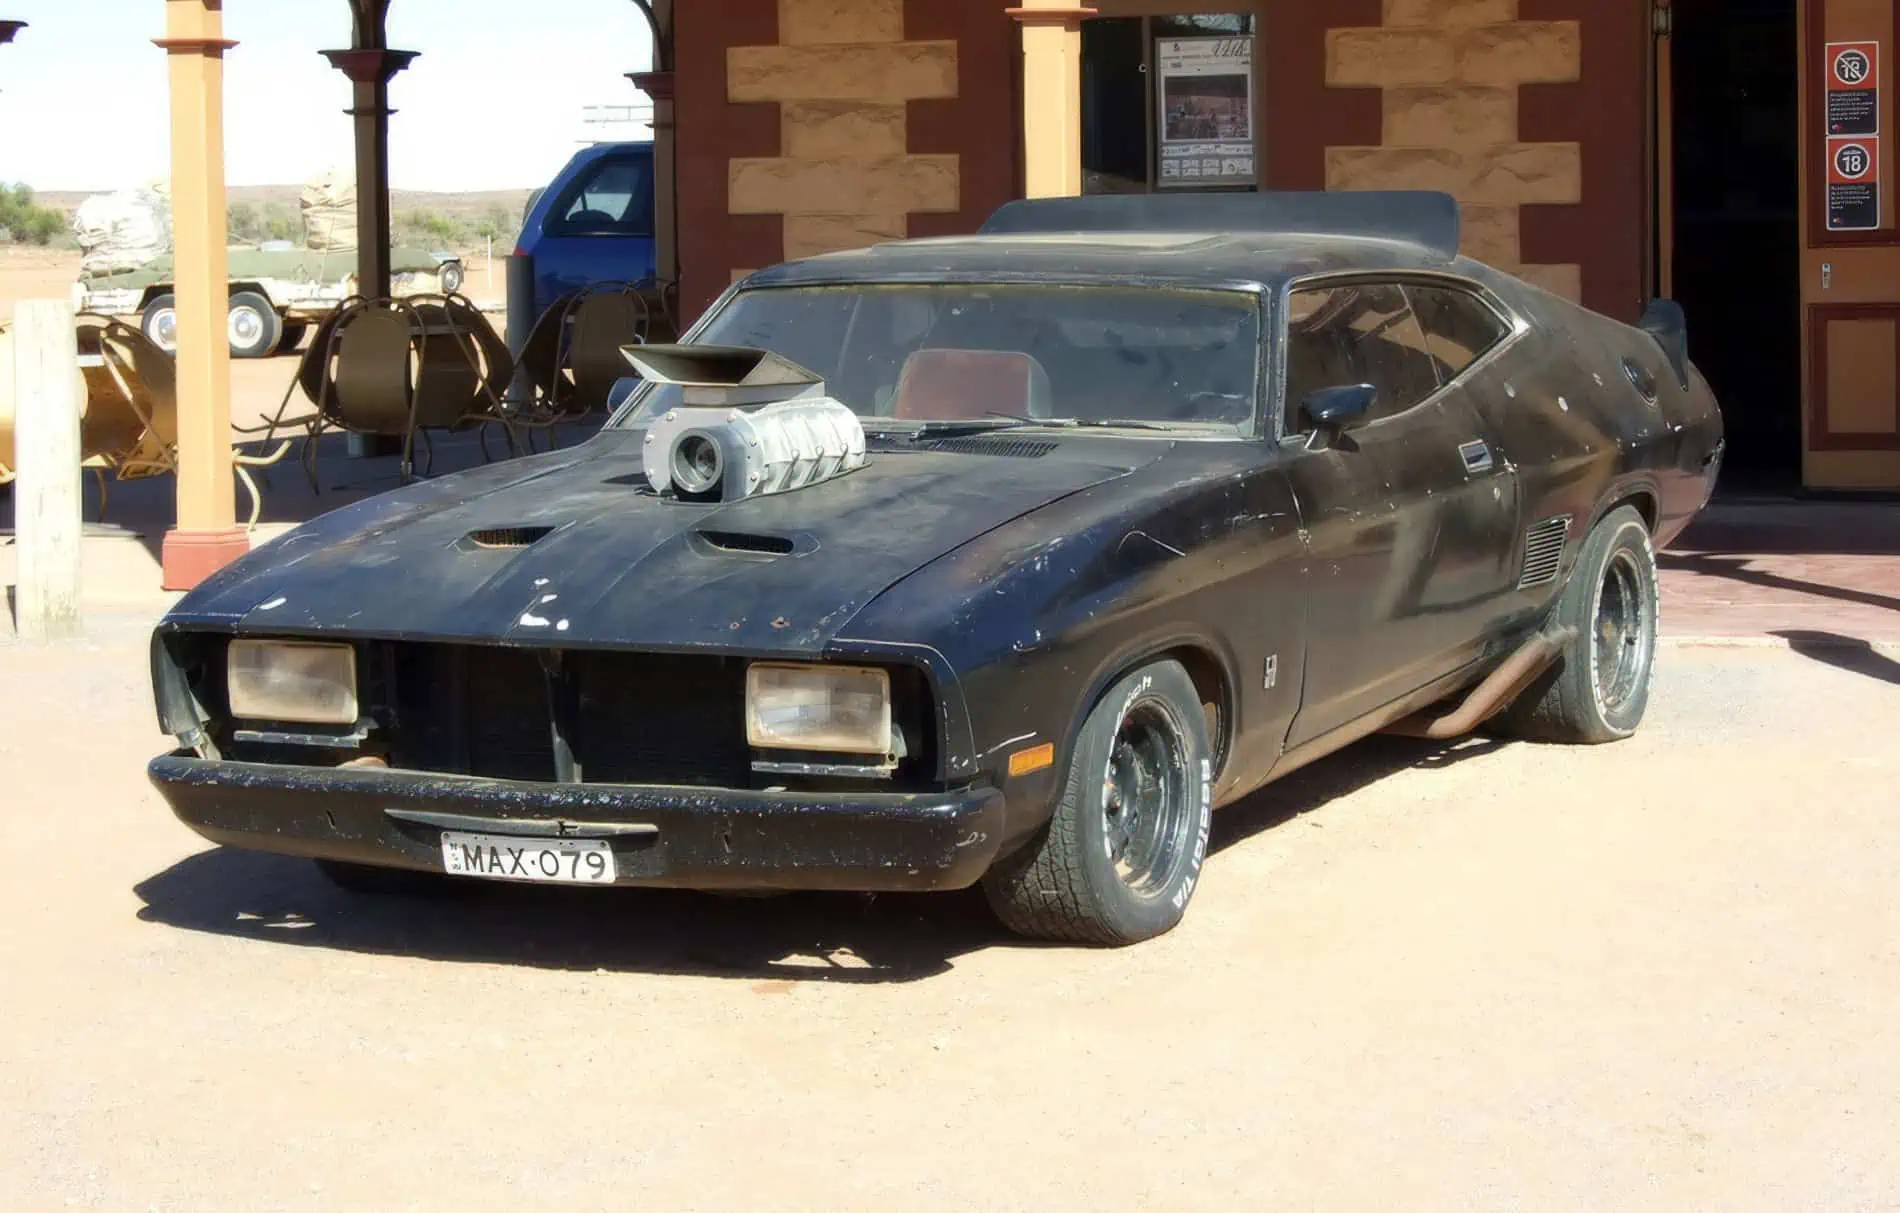 The Last Of The V8 Interceptors: A Tribute To The Iconic Mad Max Muscle Car